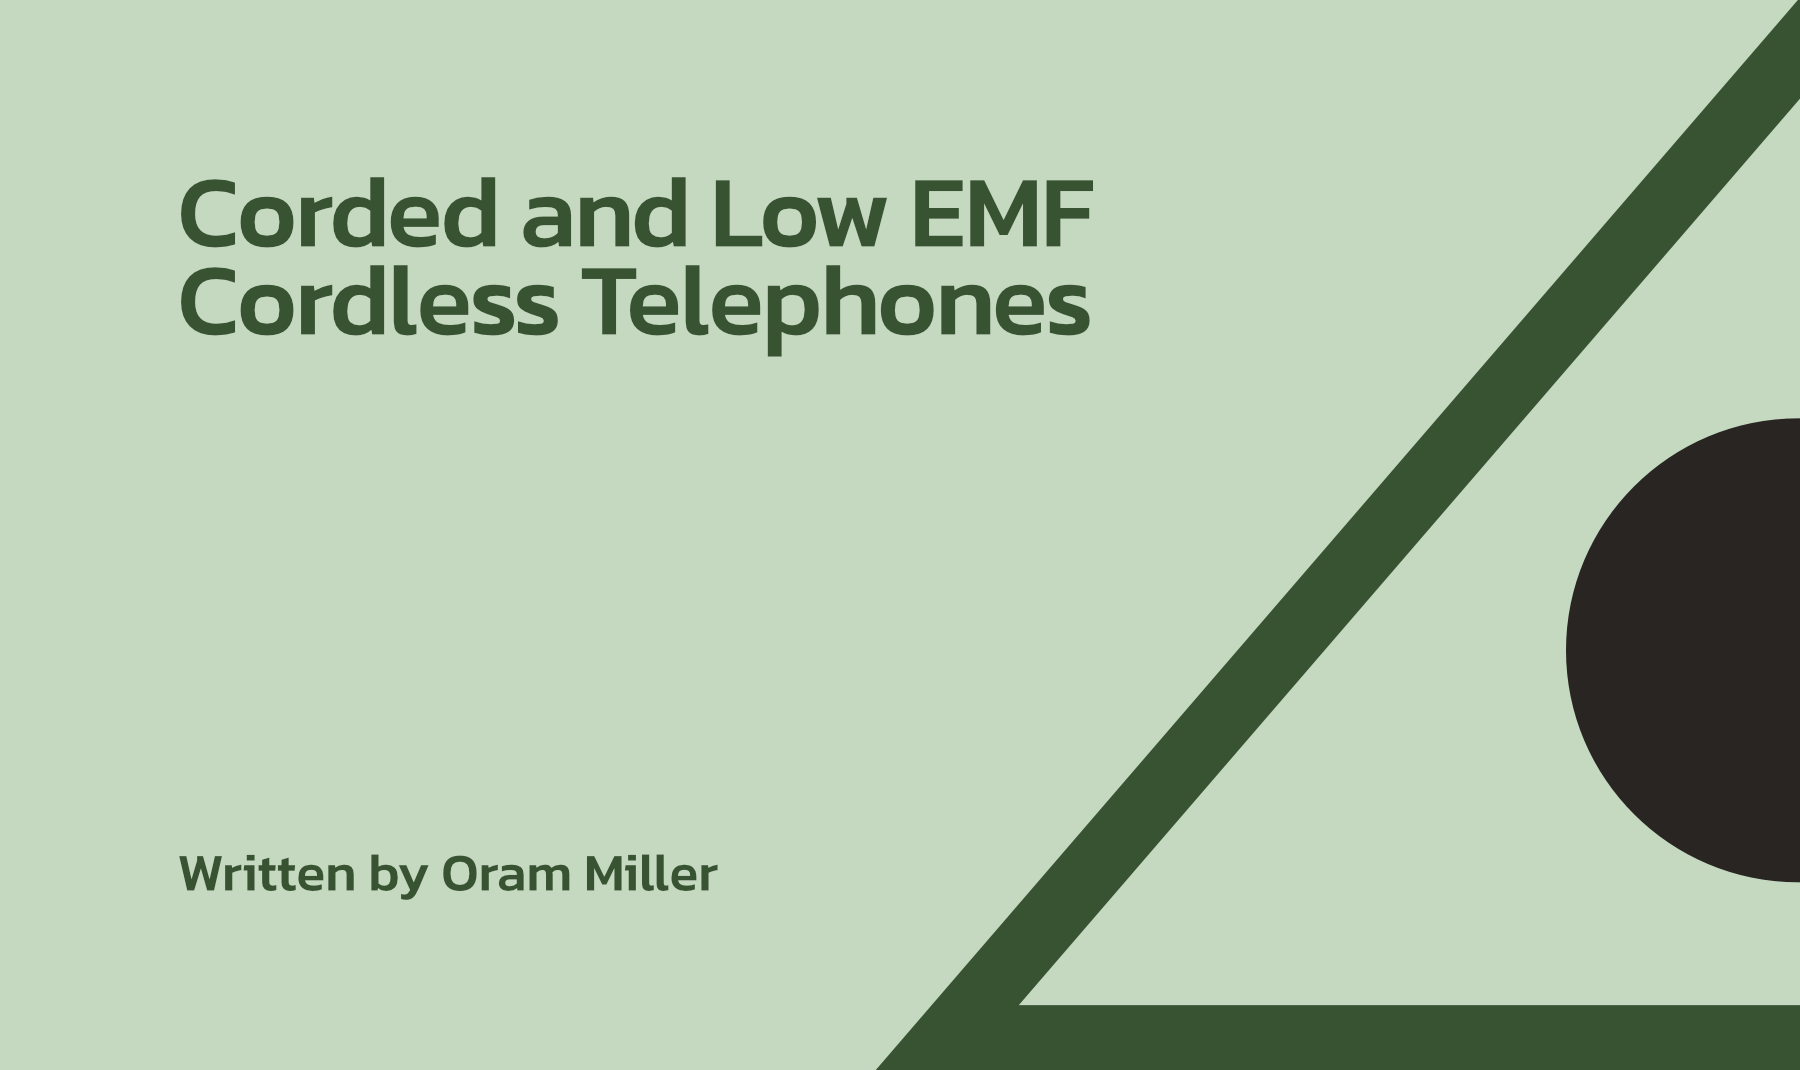 Corded and Low EMF Cordless Telephones